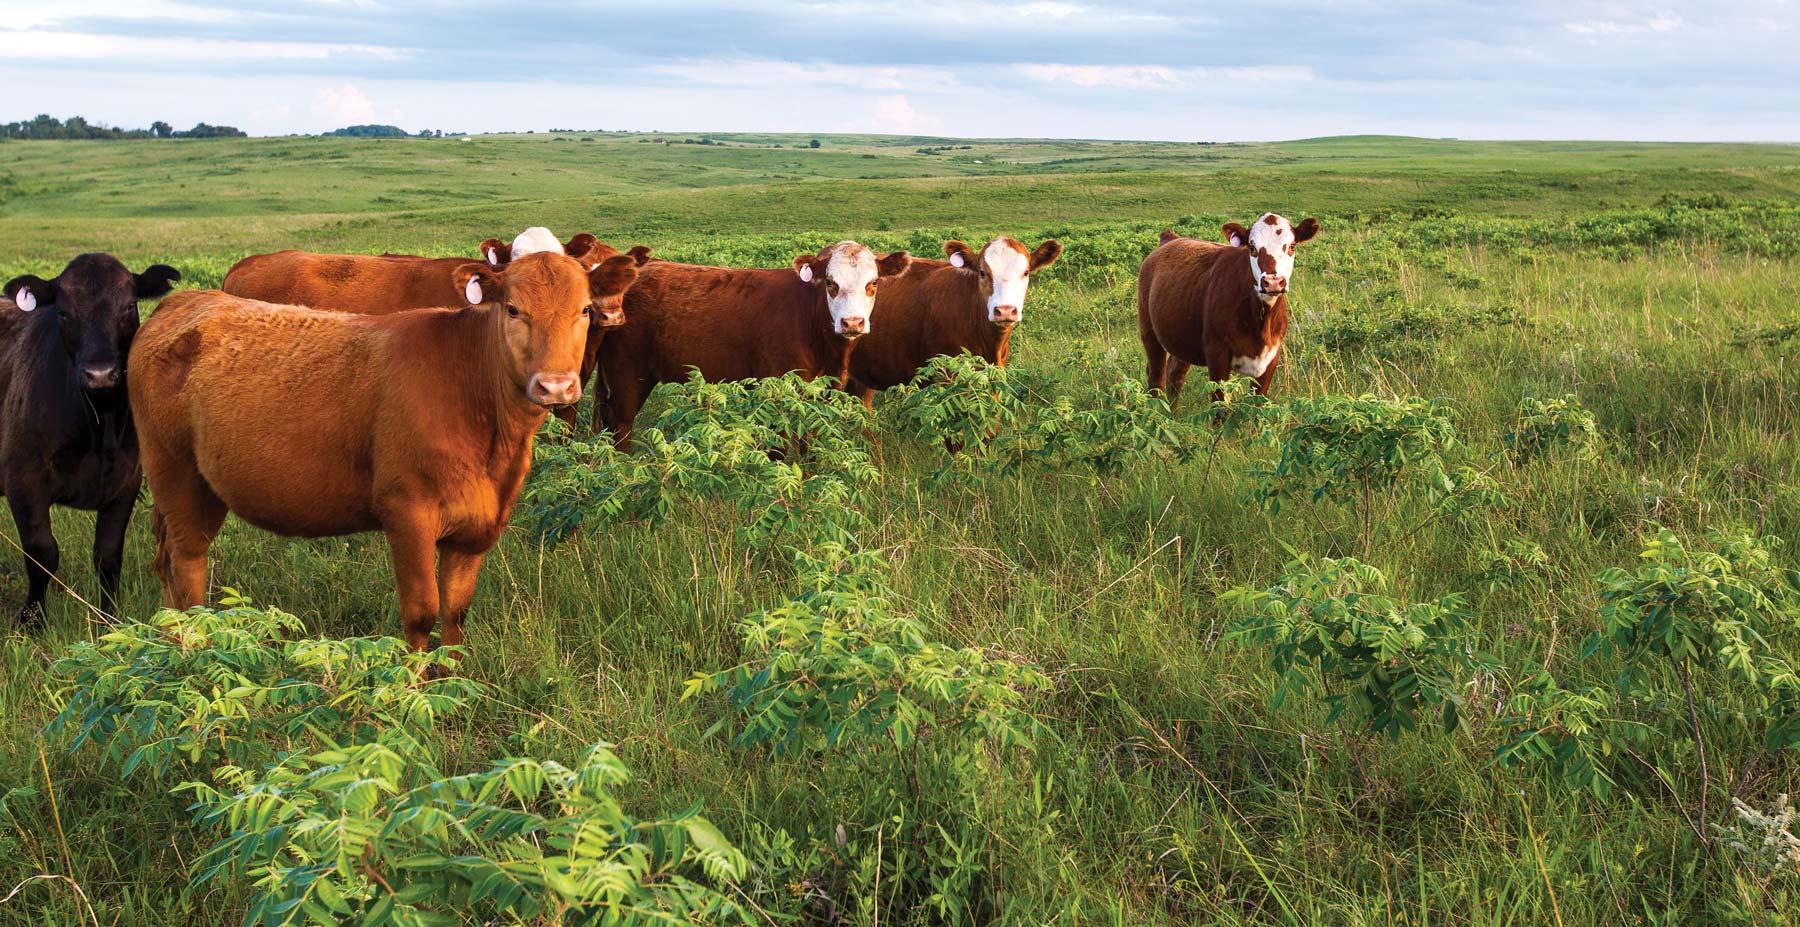 January Cattle Inventory Report Expected to Show a Stable U.S. Cow Herd Says OSU's Derrell Peel